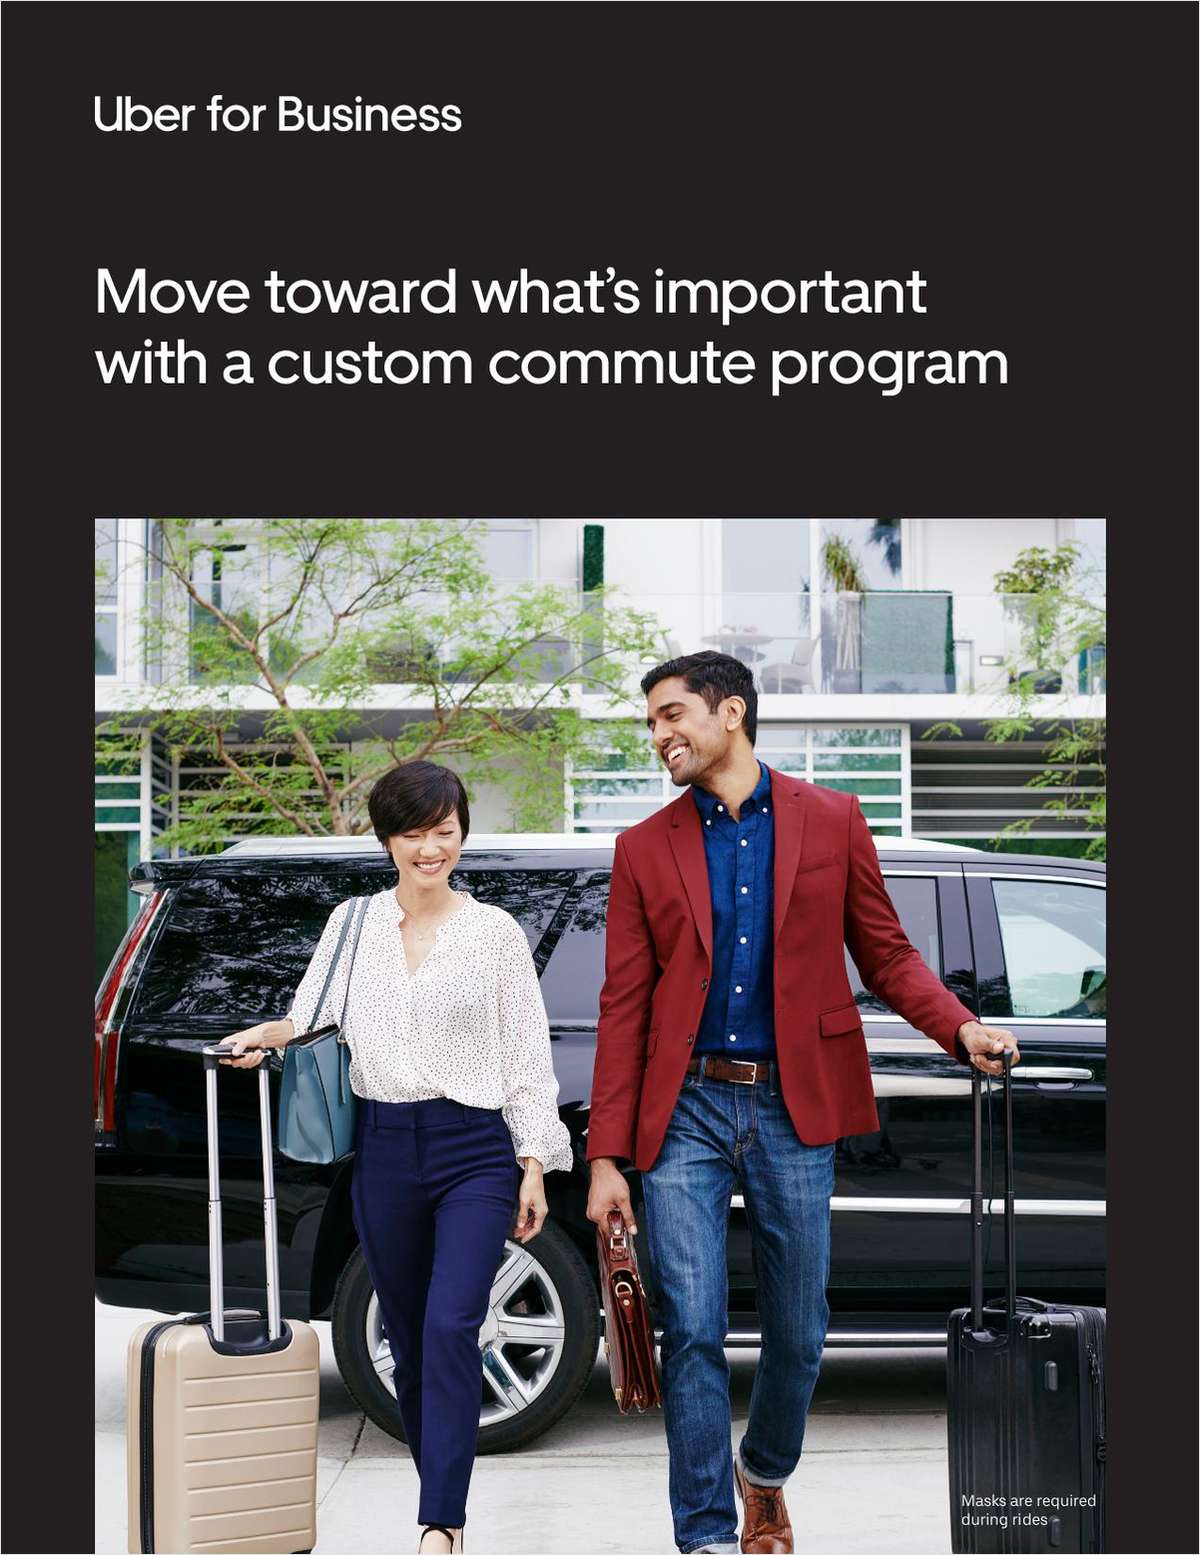 Move toward what's important with a custom commute program